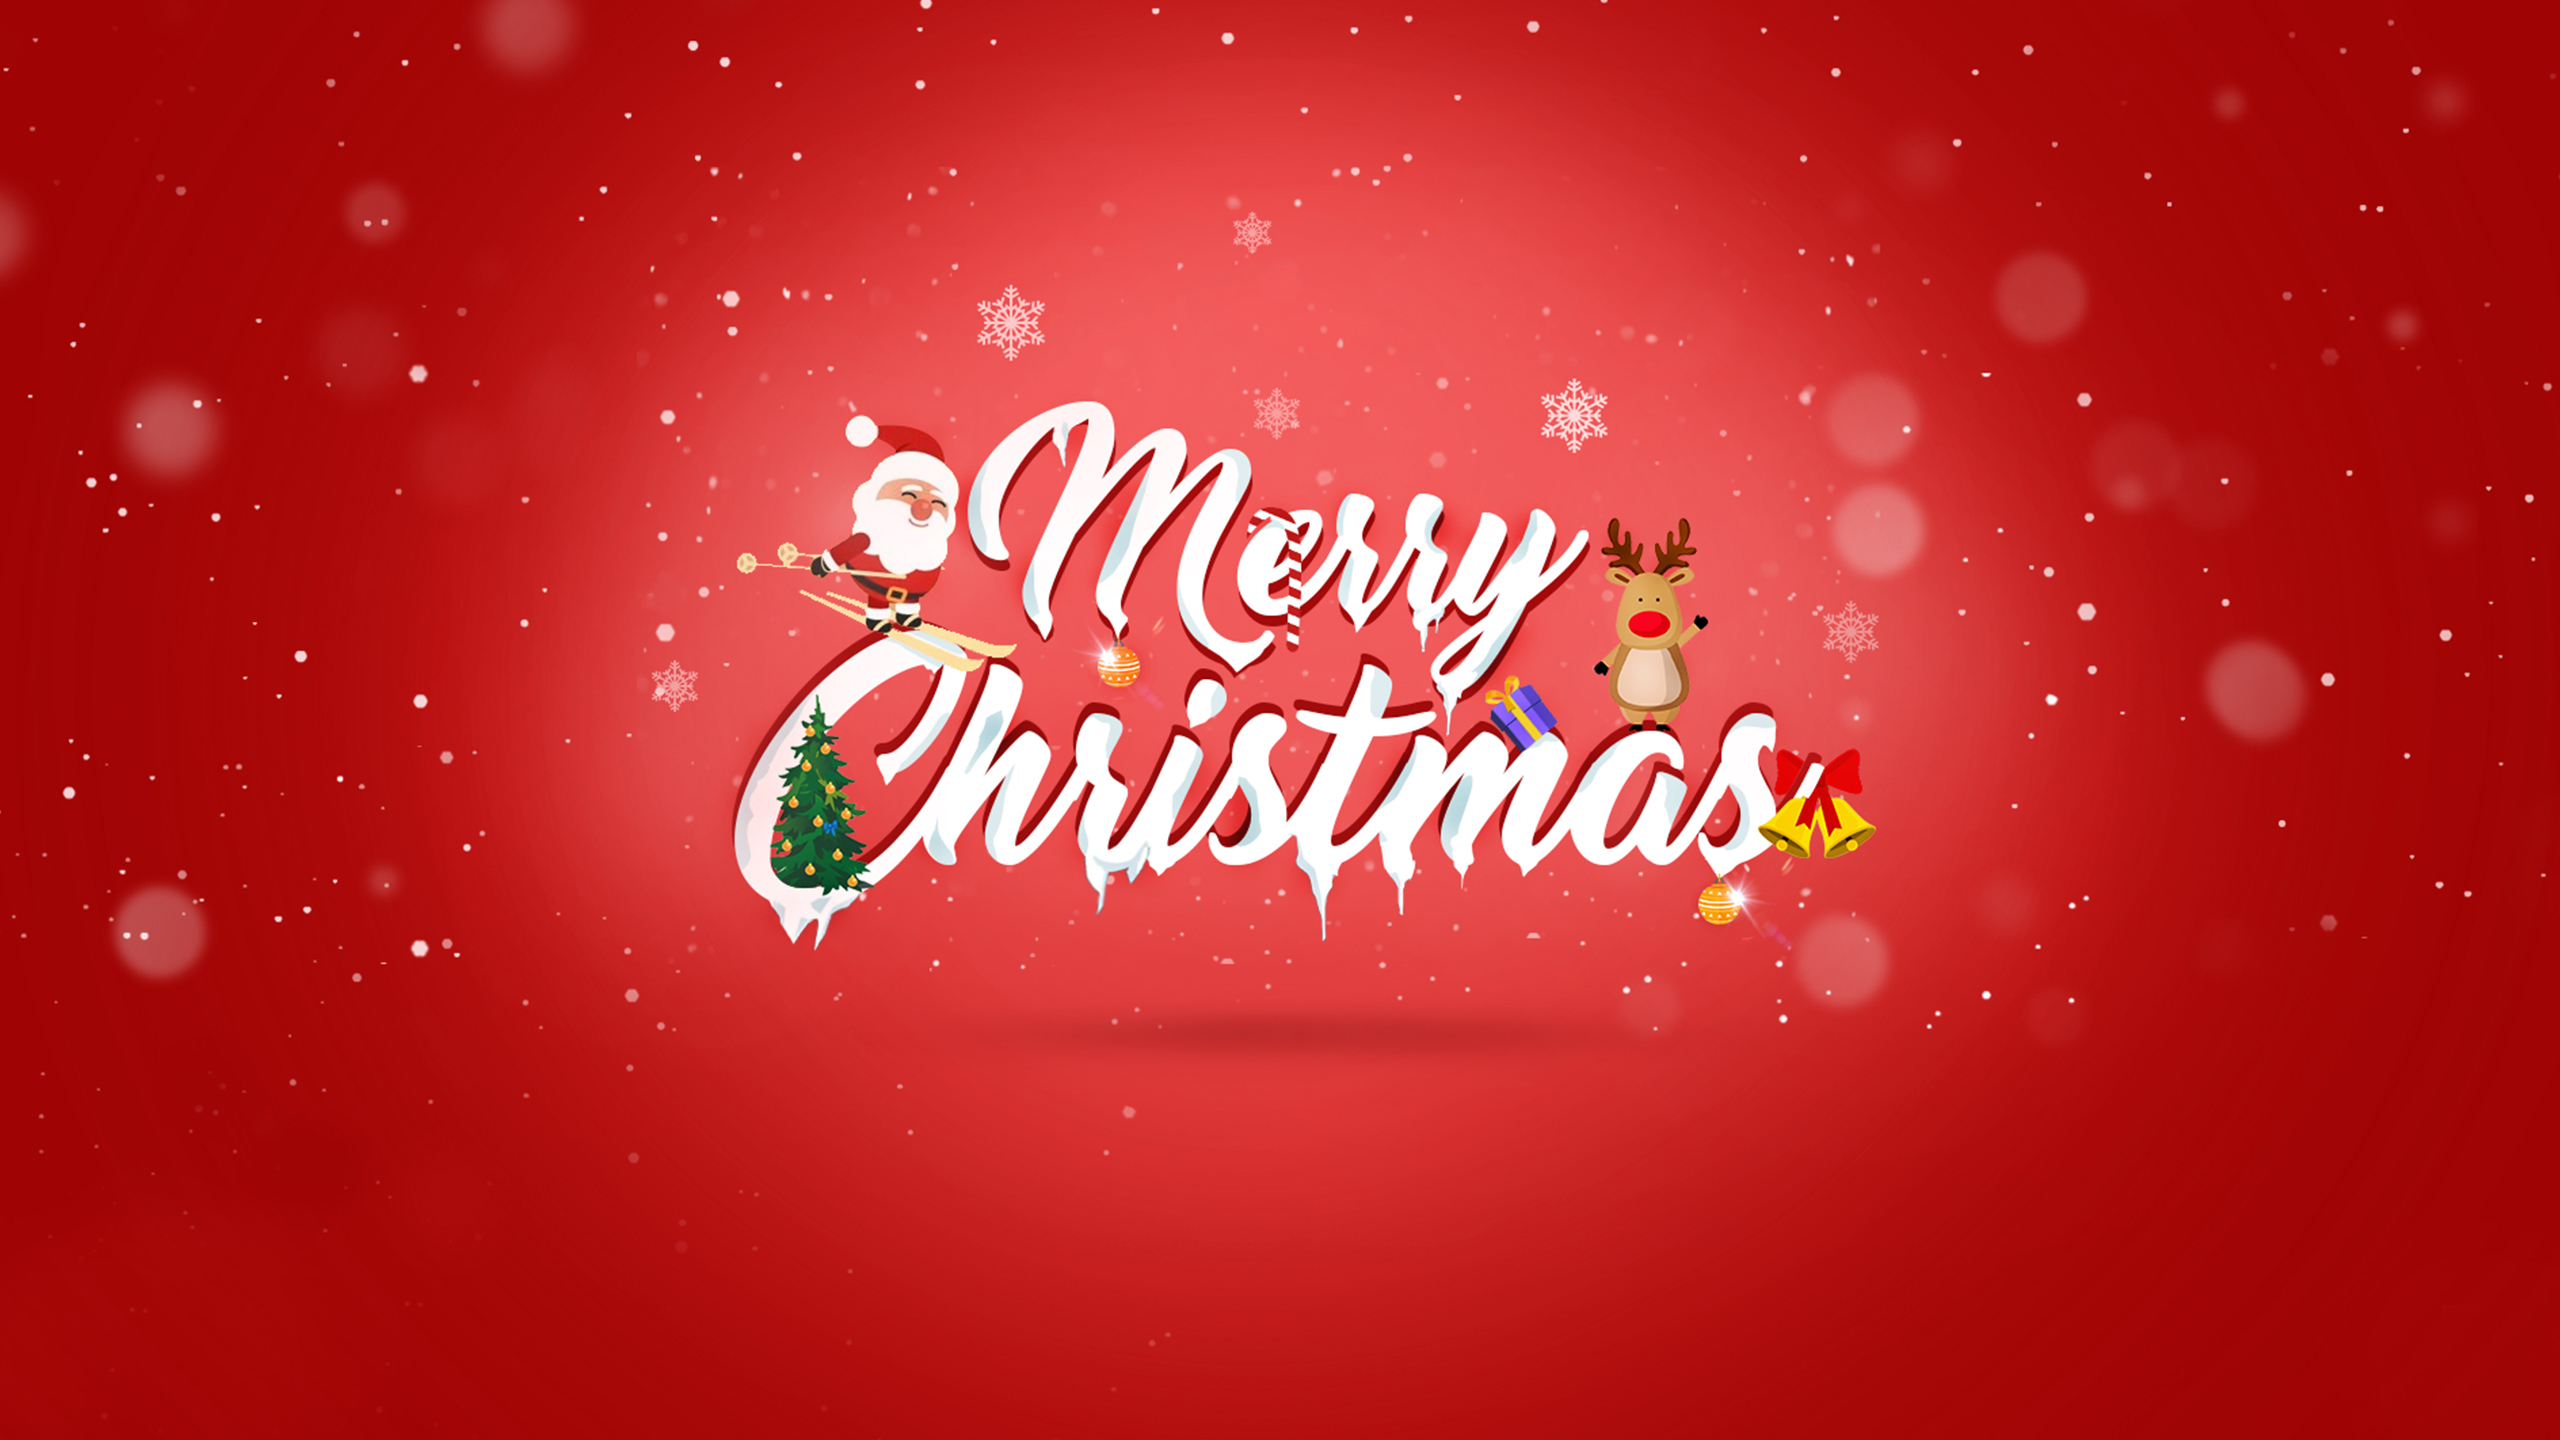 merry-christmas-hd-wallpapers-2019